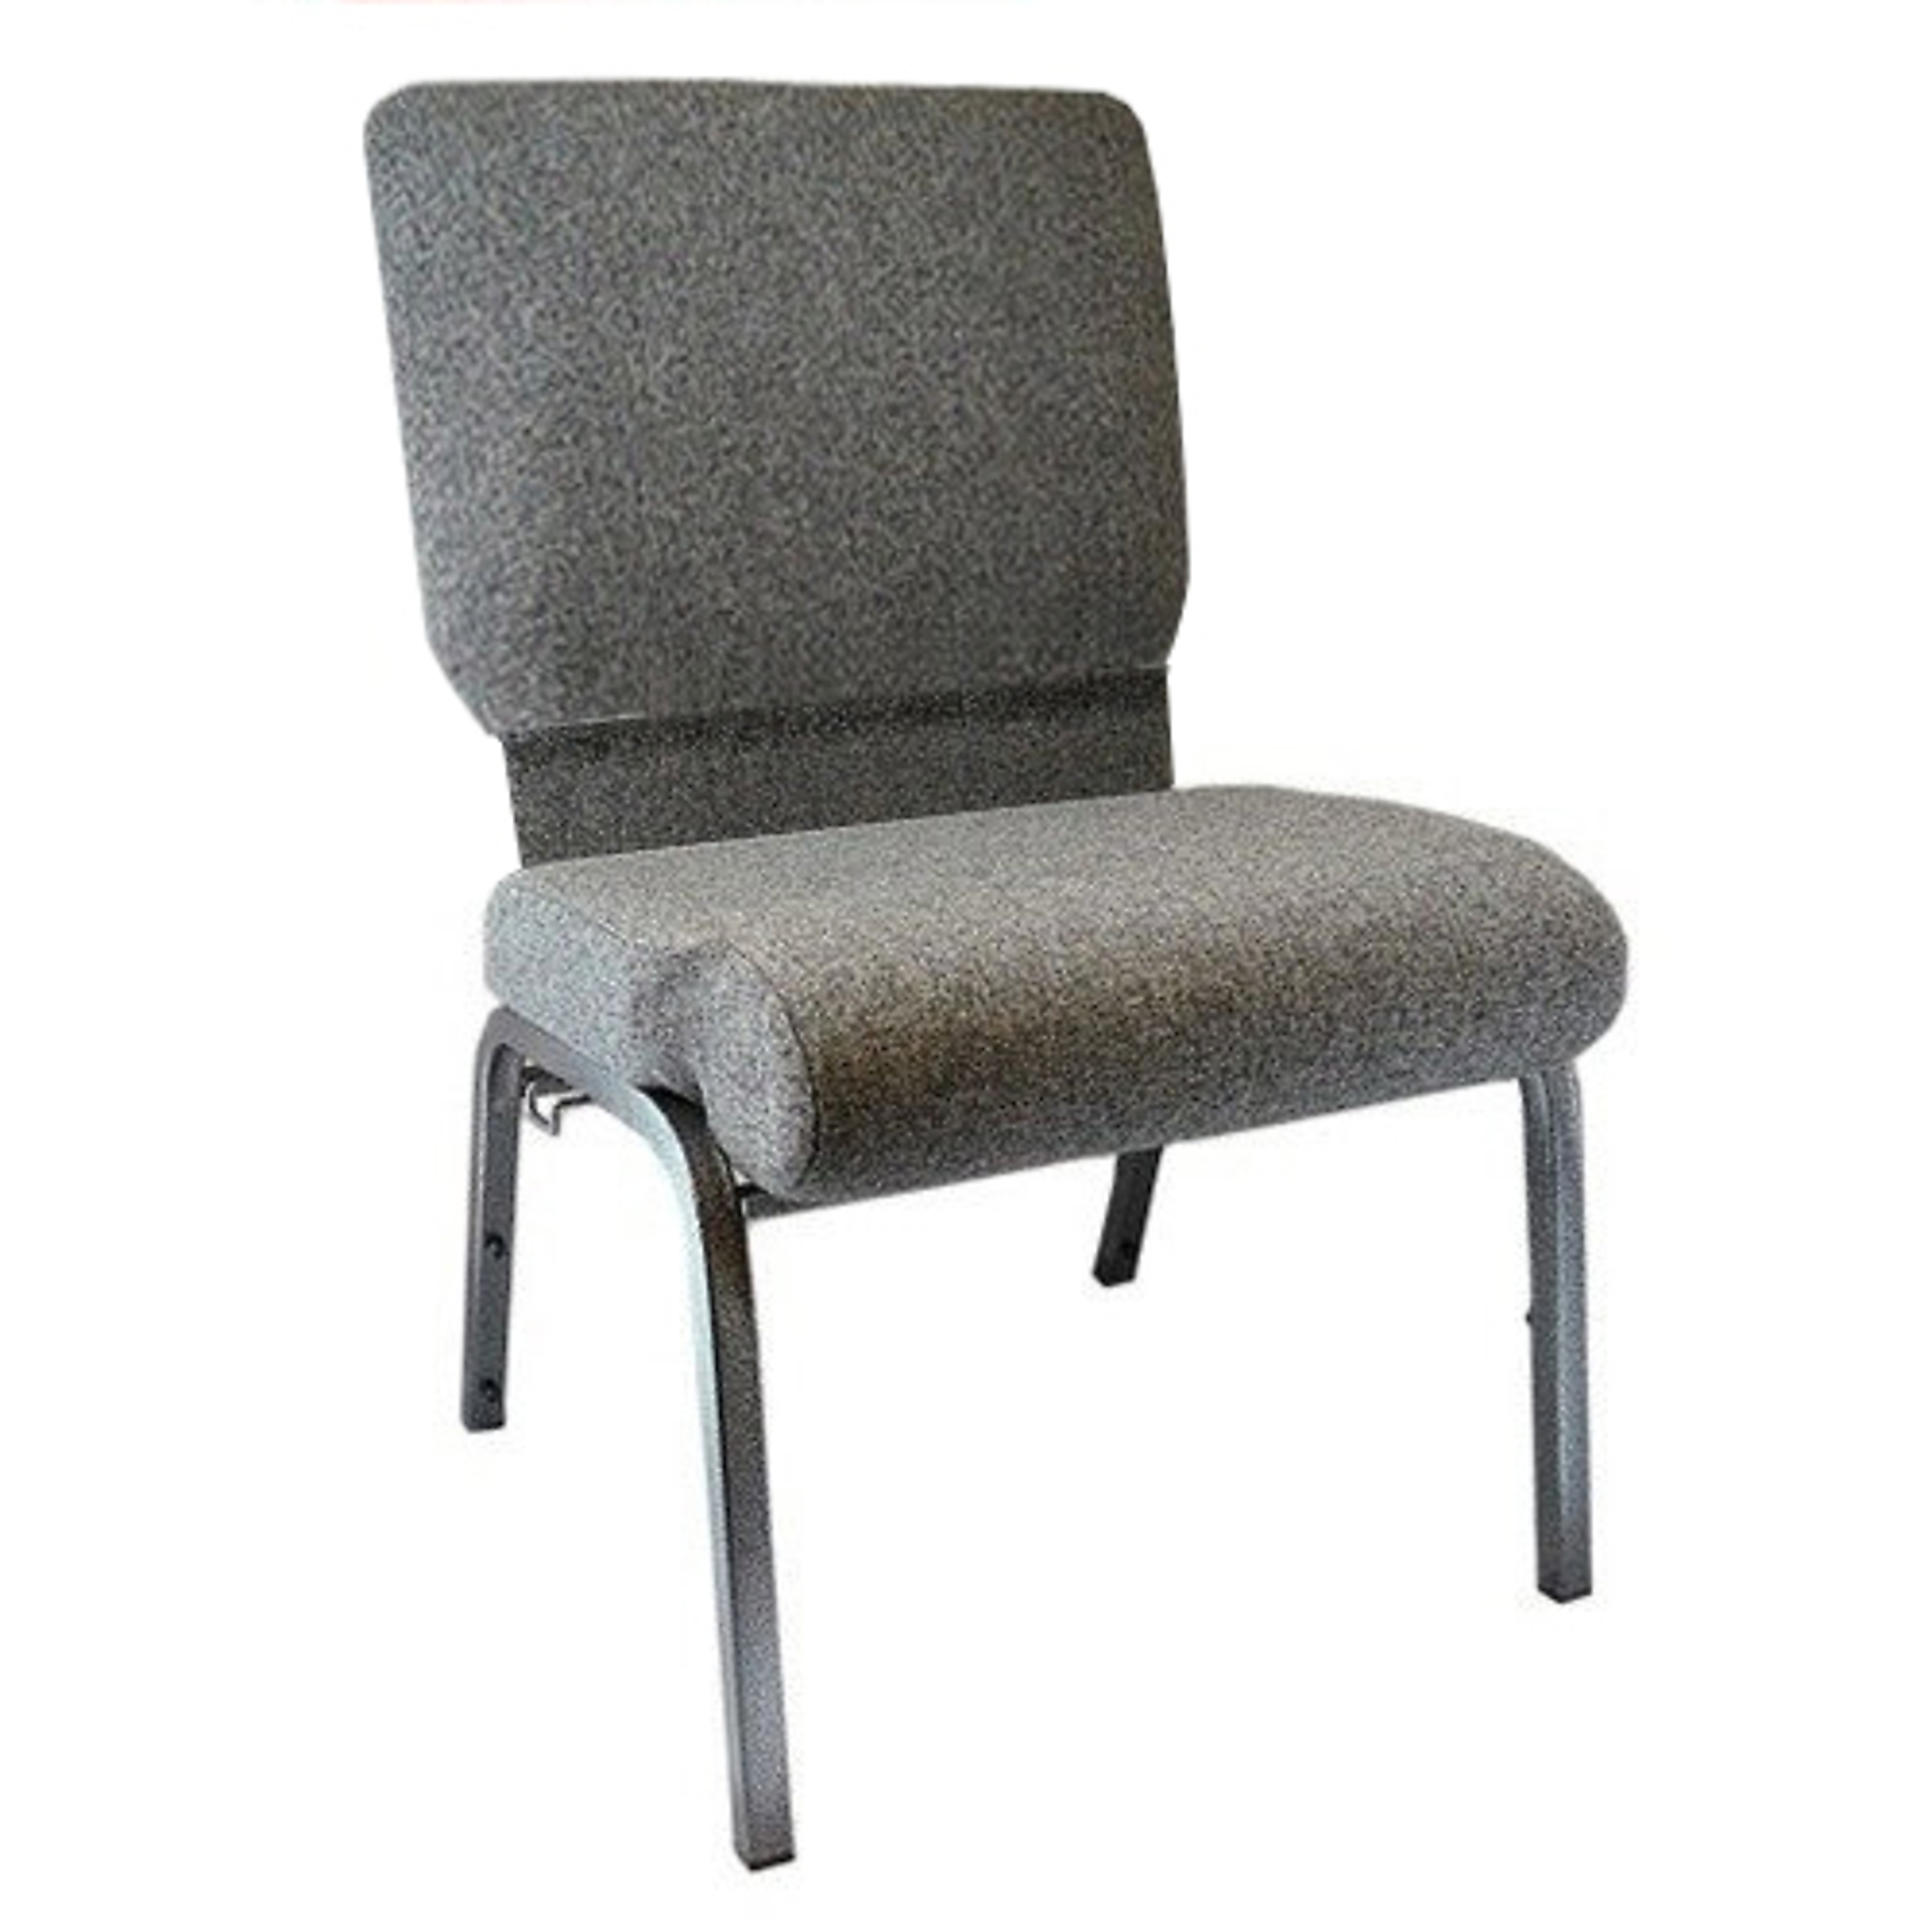 Flash Furniture, Charcoal Gray Church Chair 20.5Inch Wide, Primary Color Gray, Included (qty.) 1, Model PCHT111